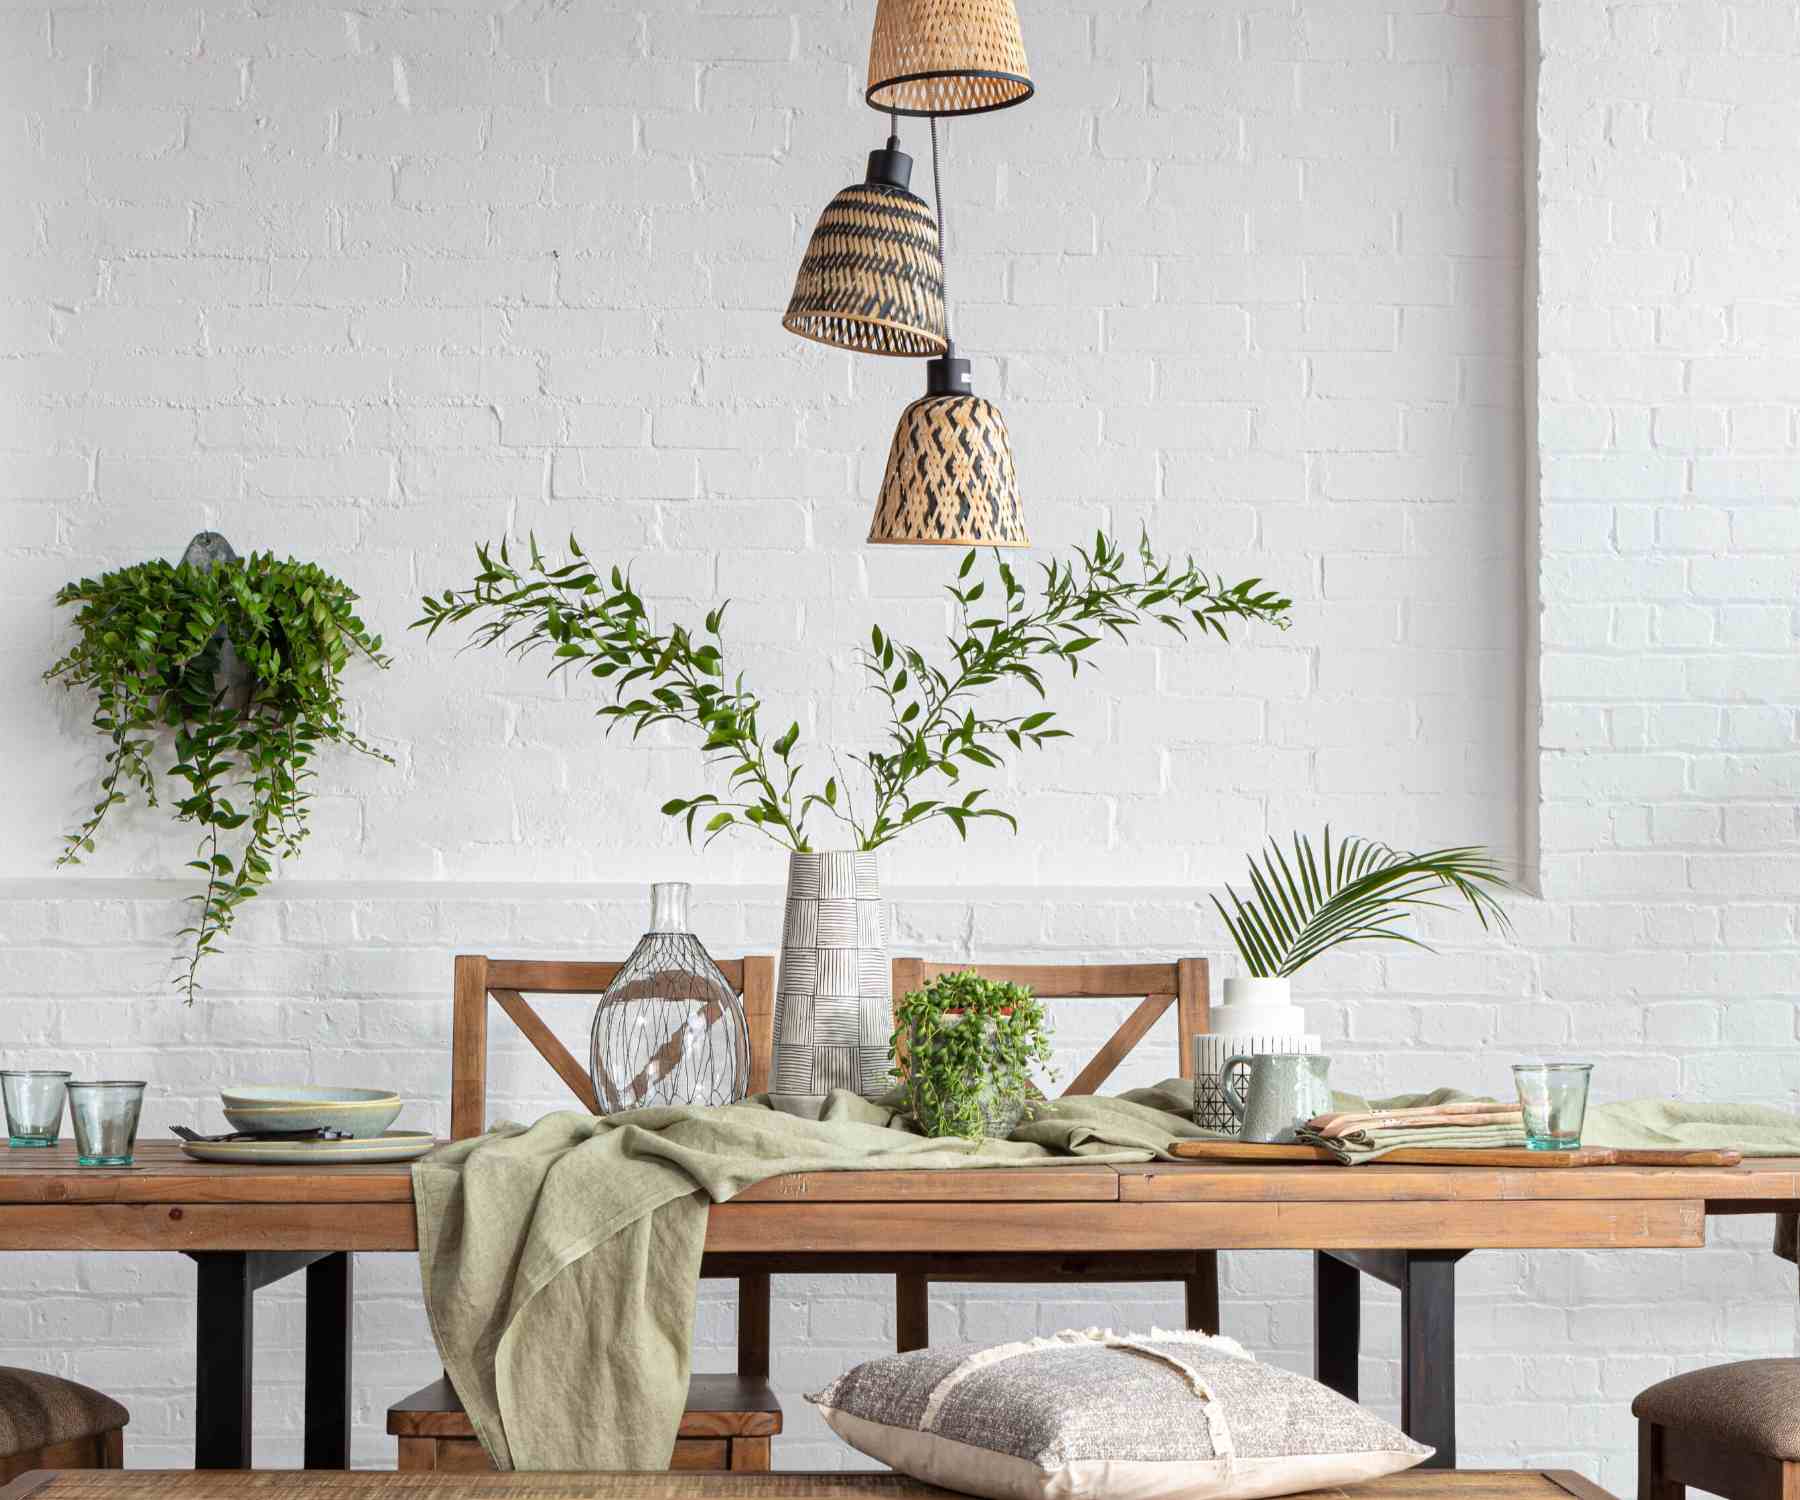 Green plants on reclaimed wood dining table and on white brick wall